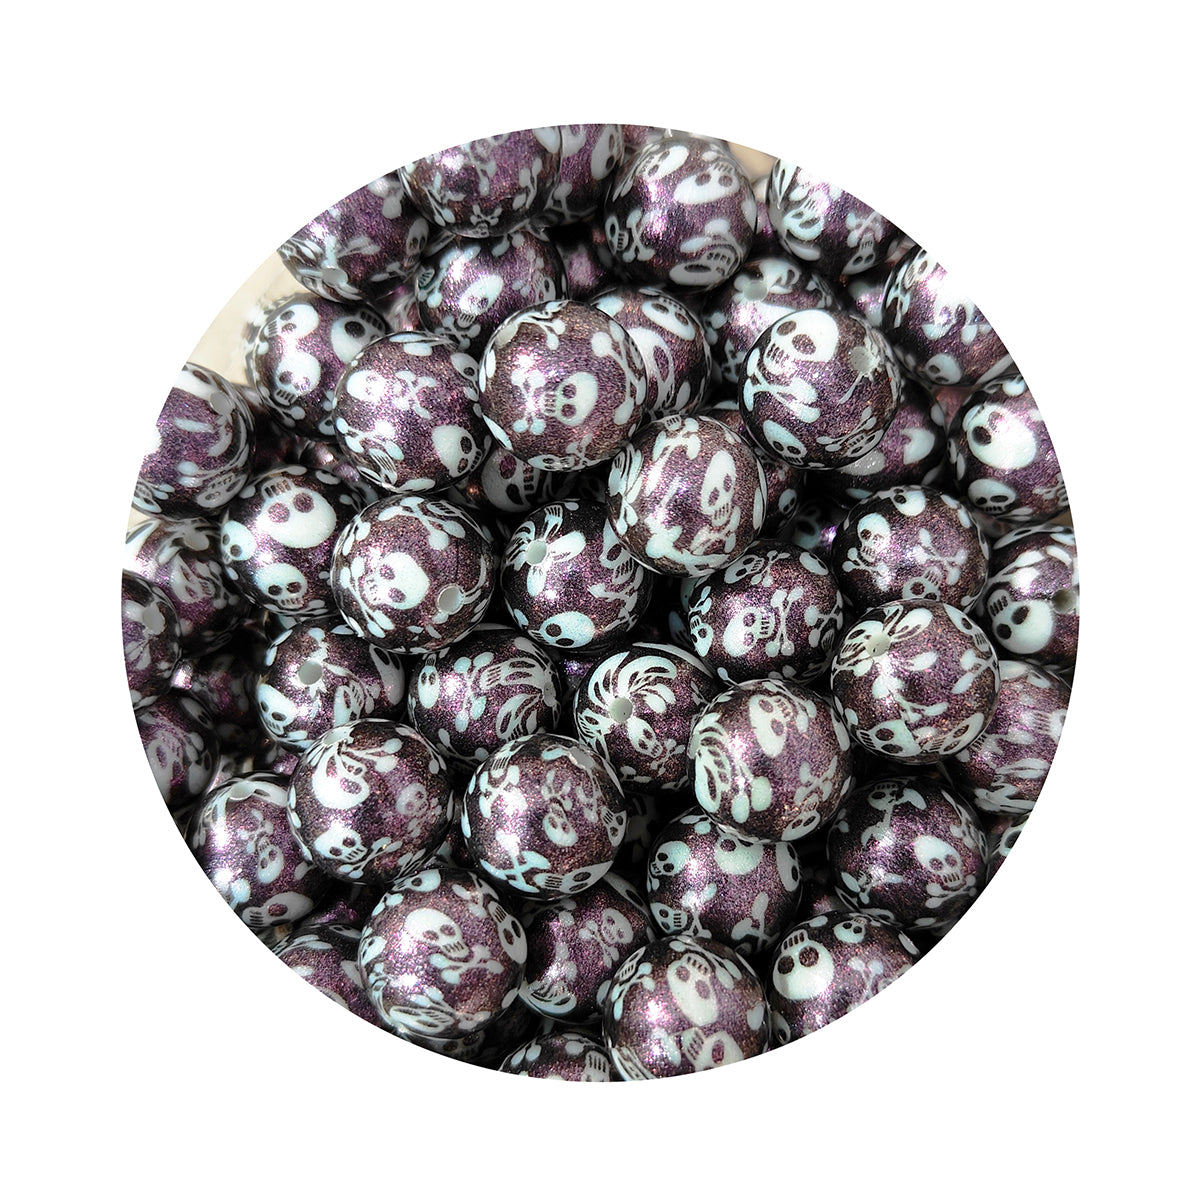 15mm Round Opal Print Silicone Beads